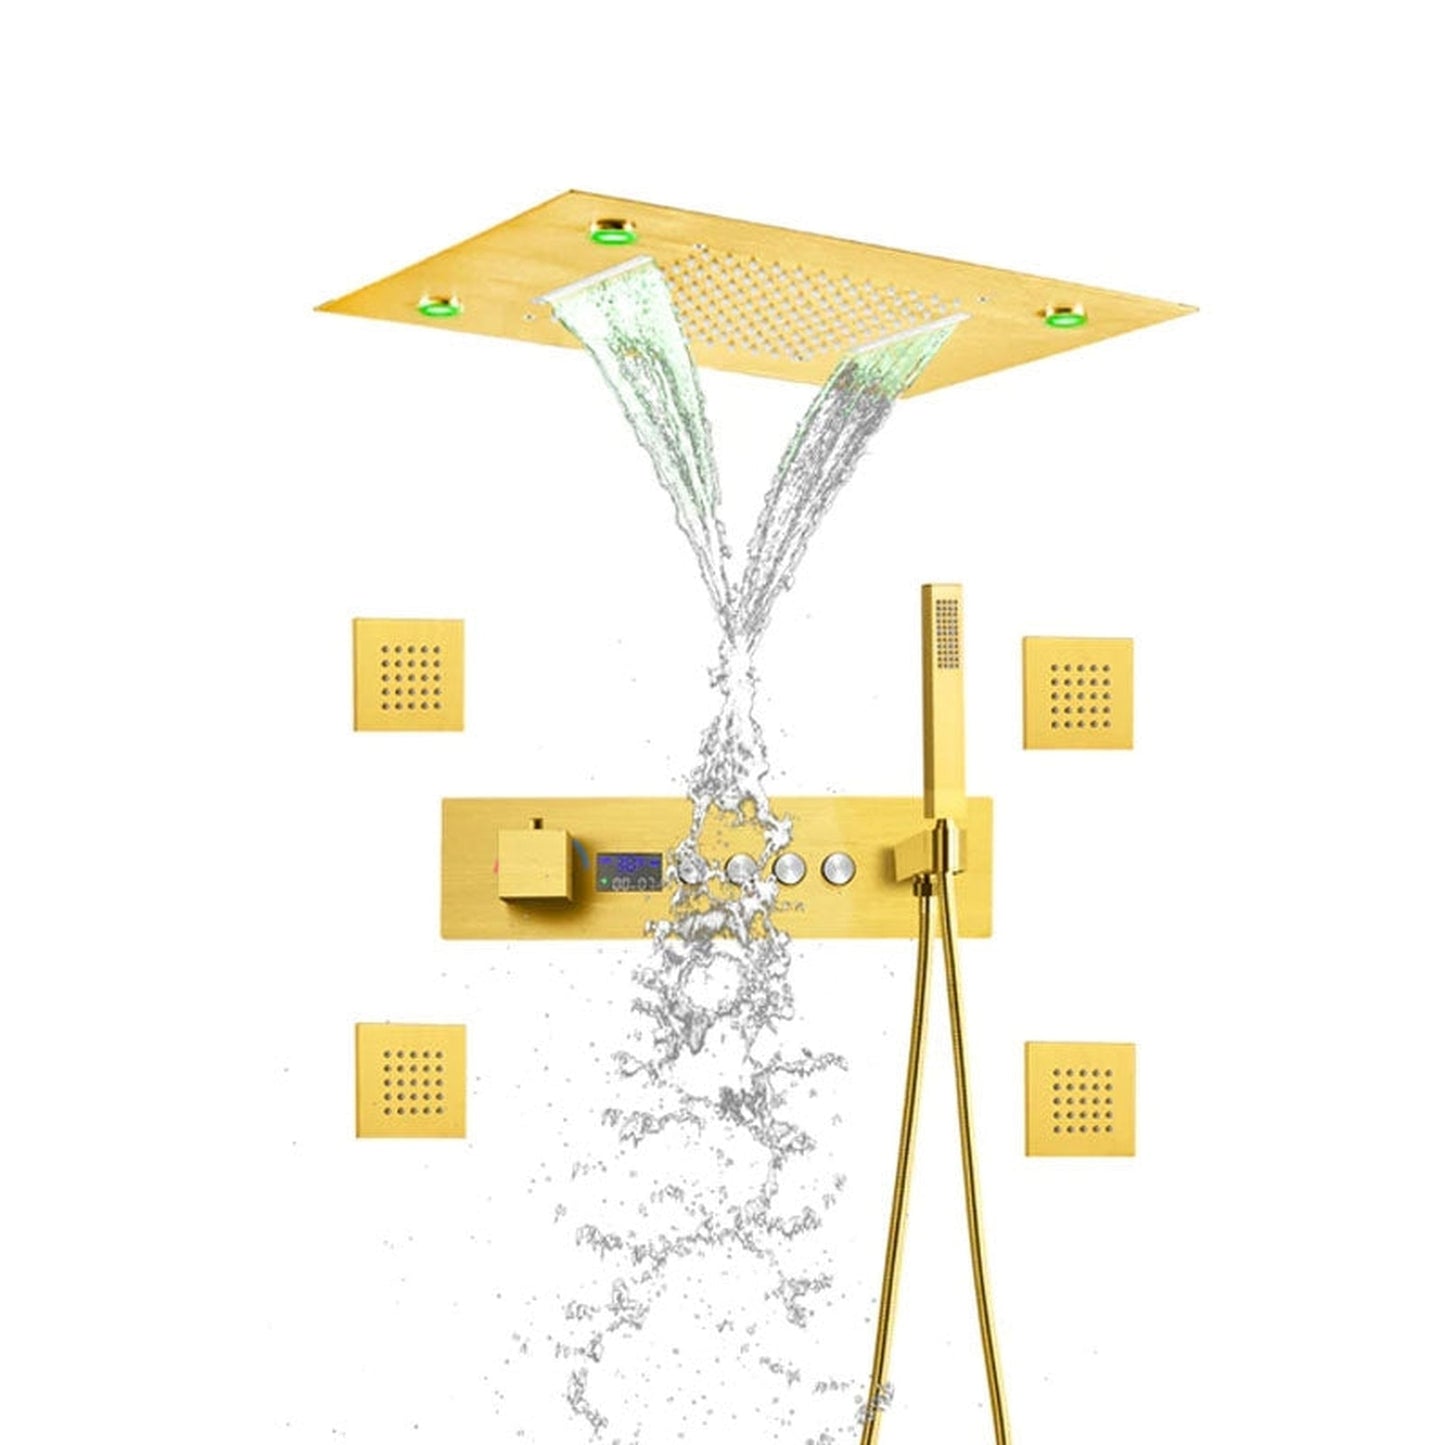 Fontana Foggia Brushed Gold Ceiling Mounted Musical Thermostatic LED Rainfall Shower System With 4-Body Jets and Hand Shower